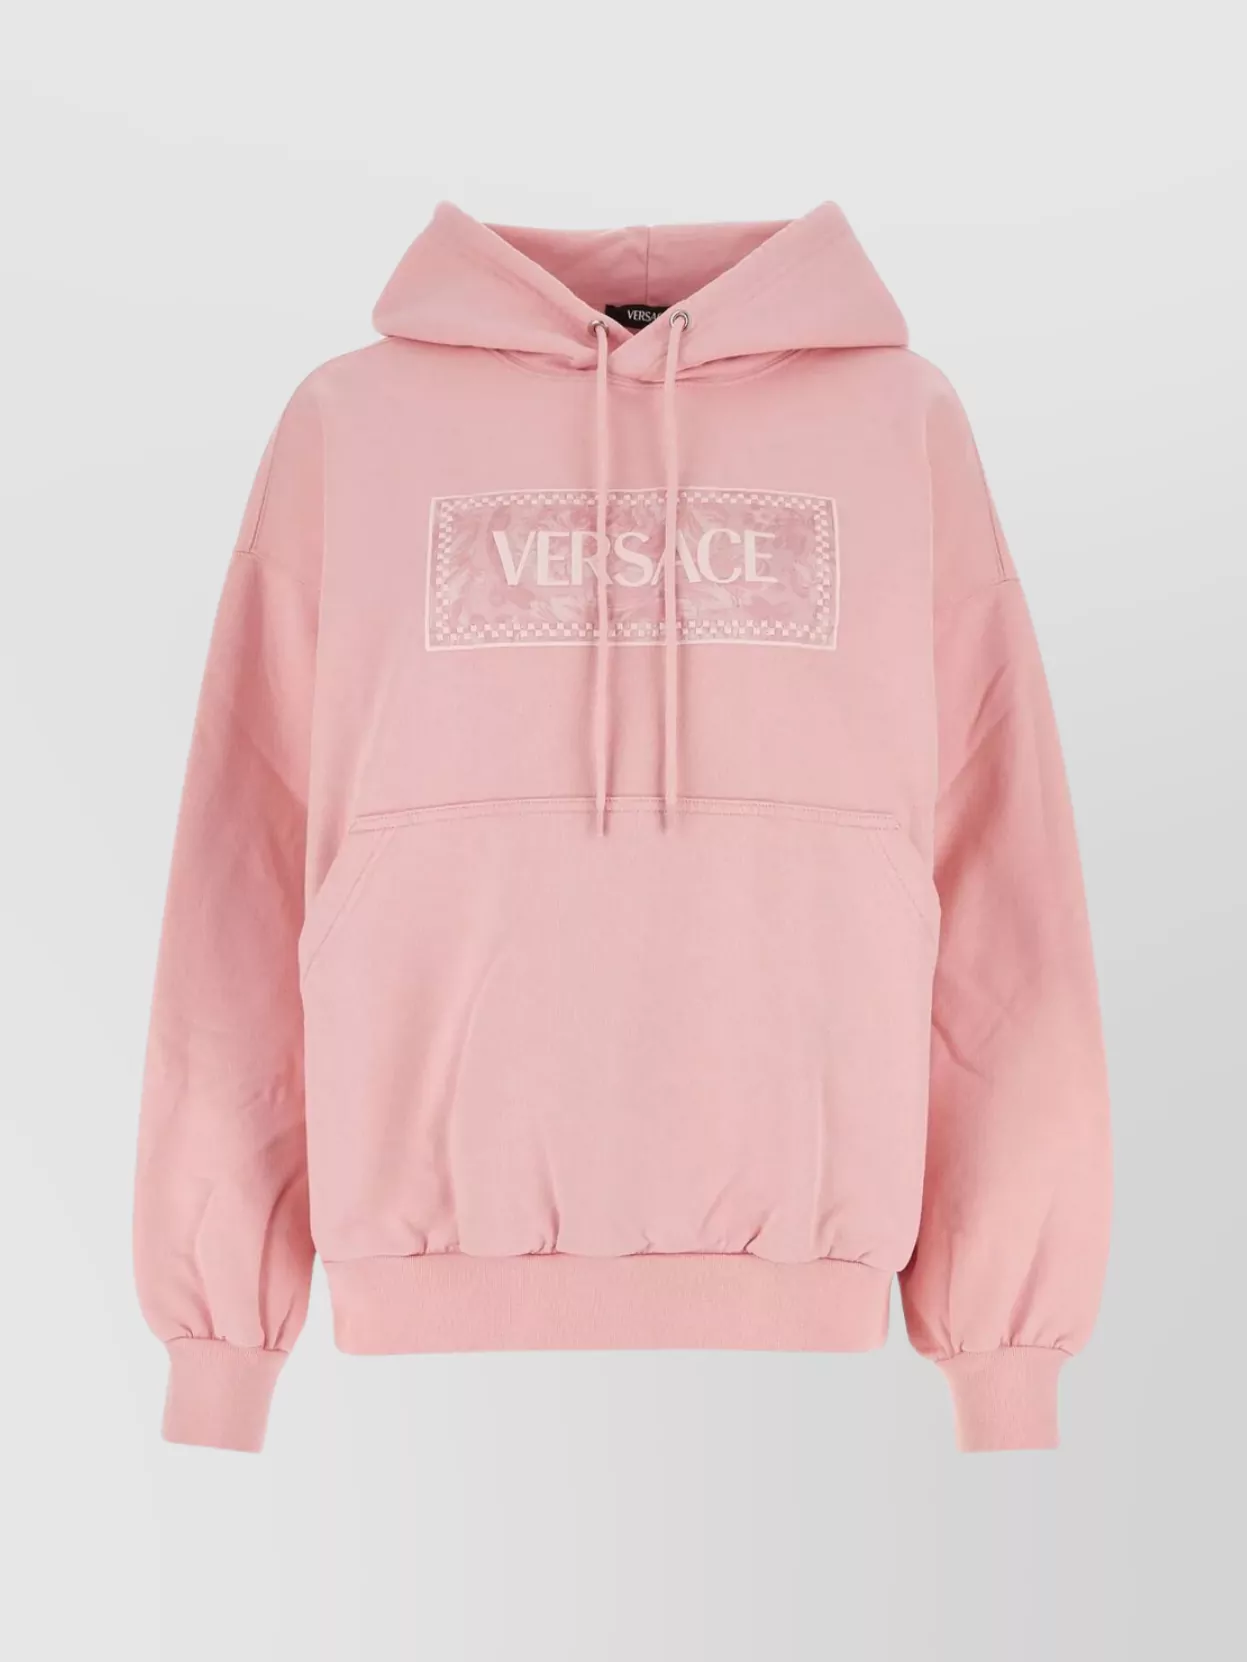 Shop Versace Cotton Hooded Sweatshirt With Drawstring And Pouch Pocket